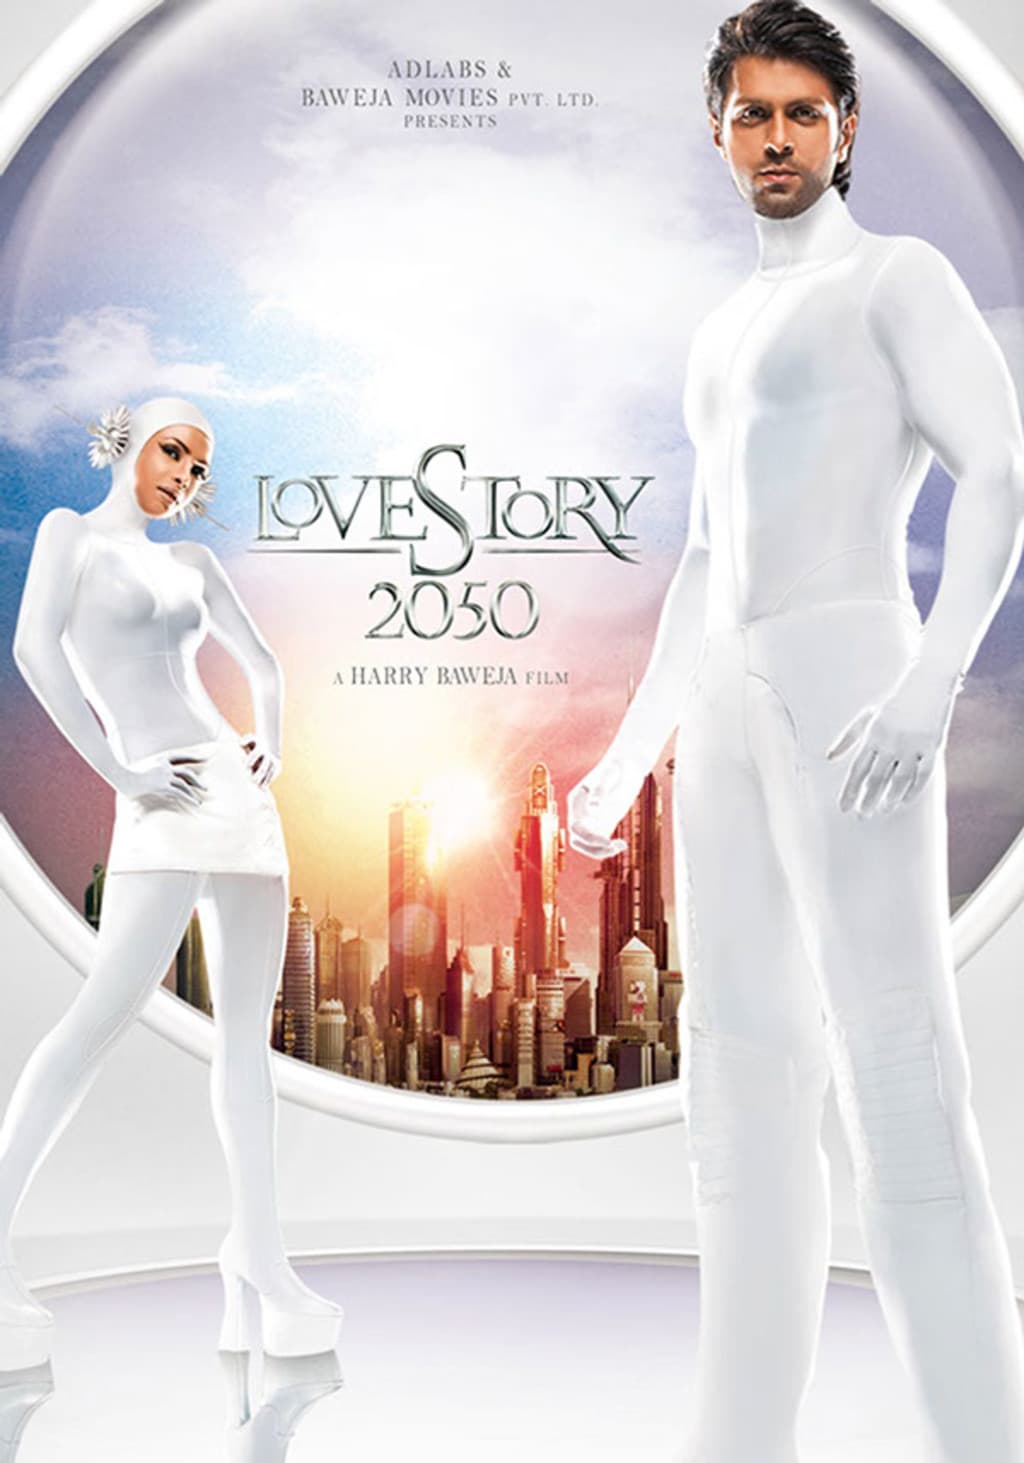 Poster for the movie "Love Story 2050"